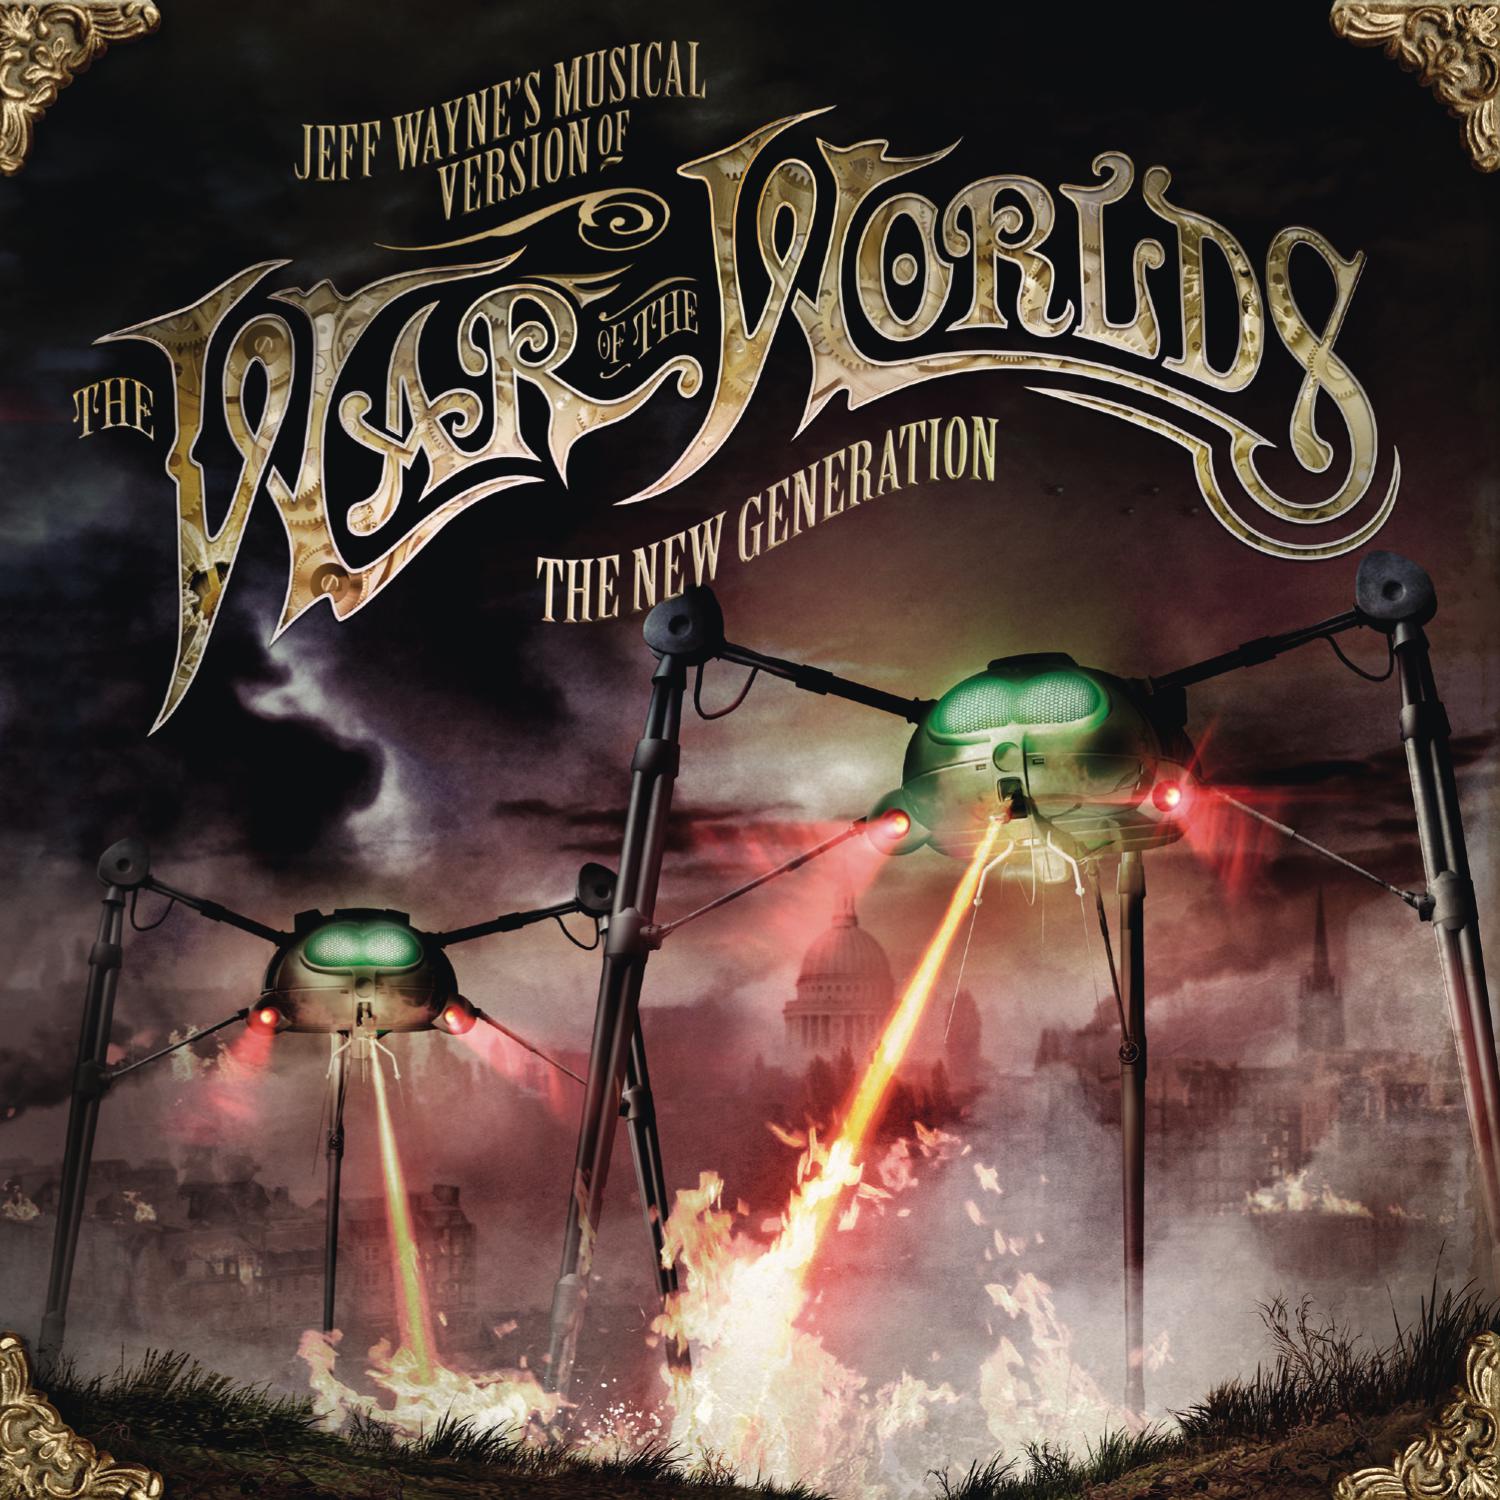 Jeff Wayne’s Musical Version Of The War Of The Worlds – The New Generation